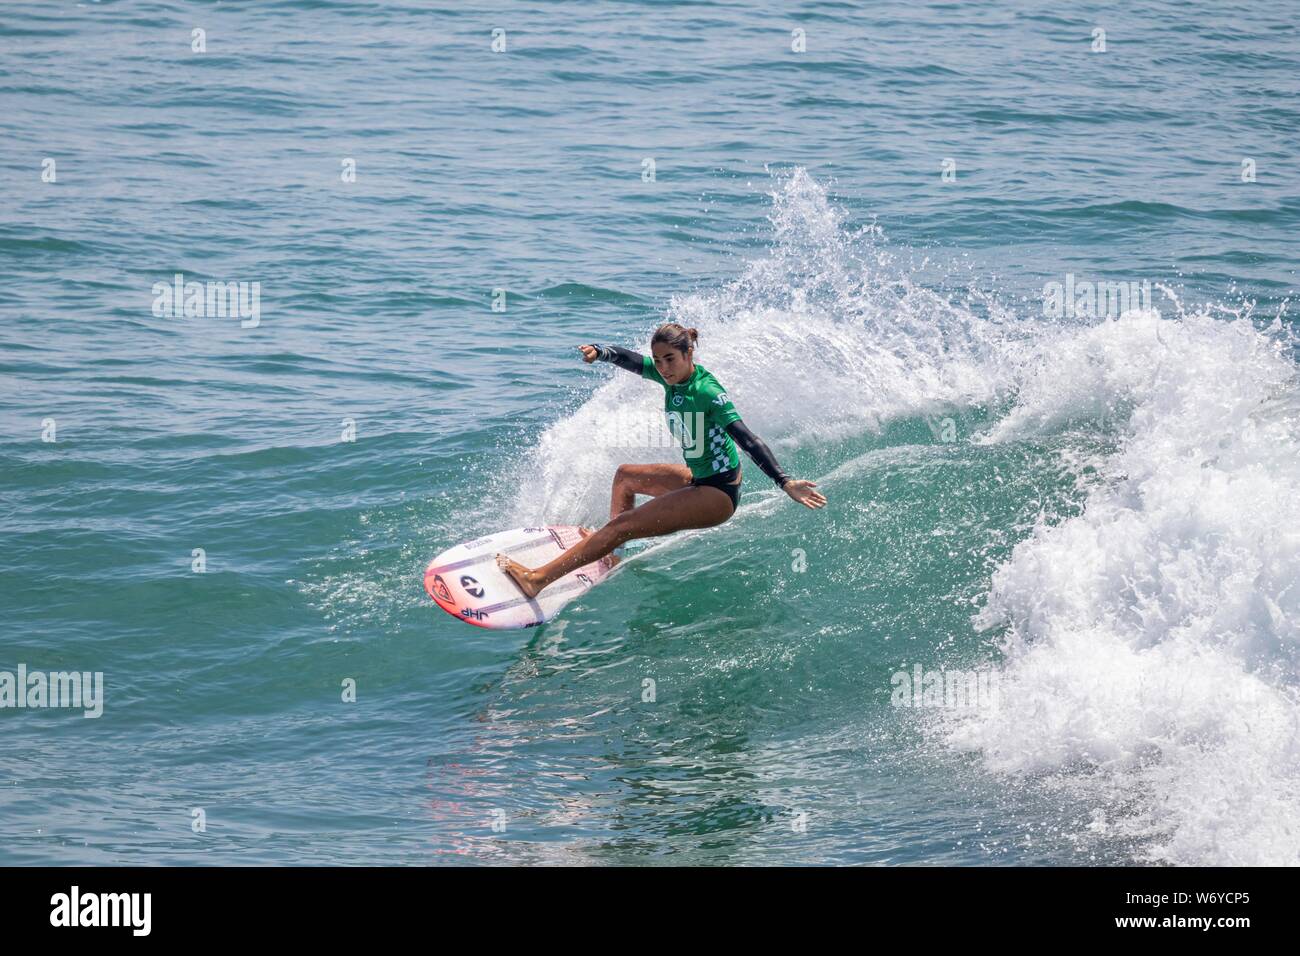 Sol Aguirre of Peru competes in the Vans US Open of Surfing 2019 Stock  Photo - Alamy